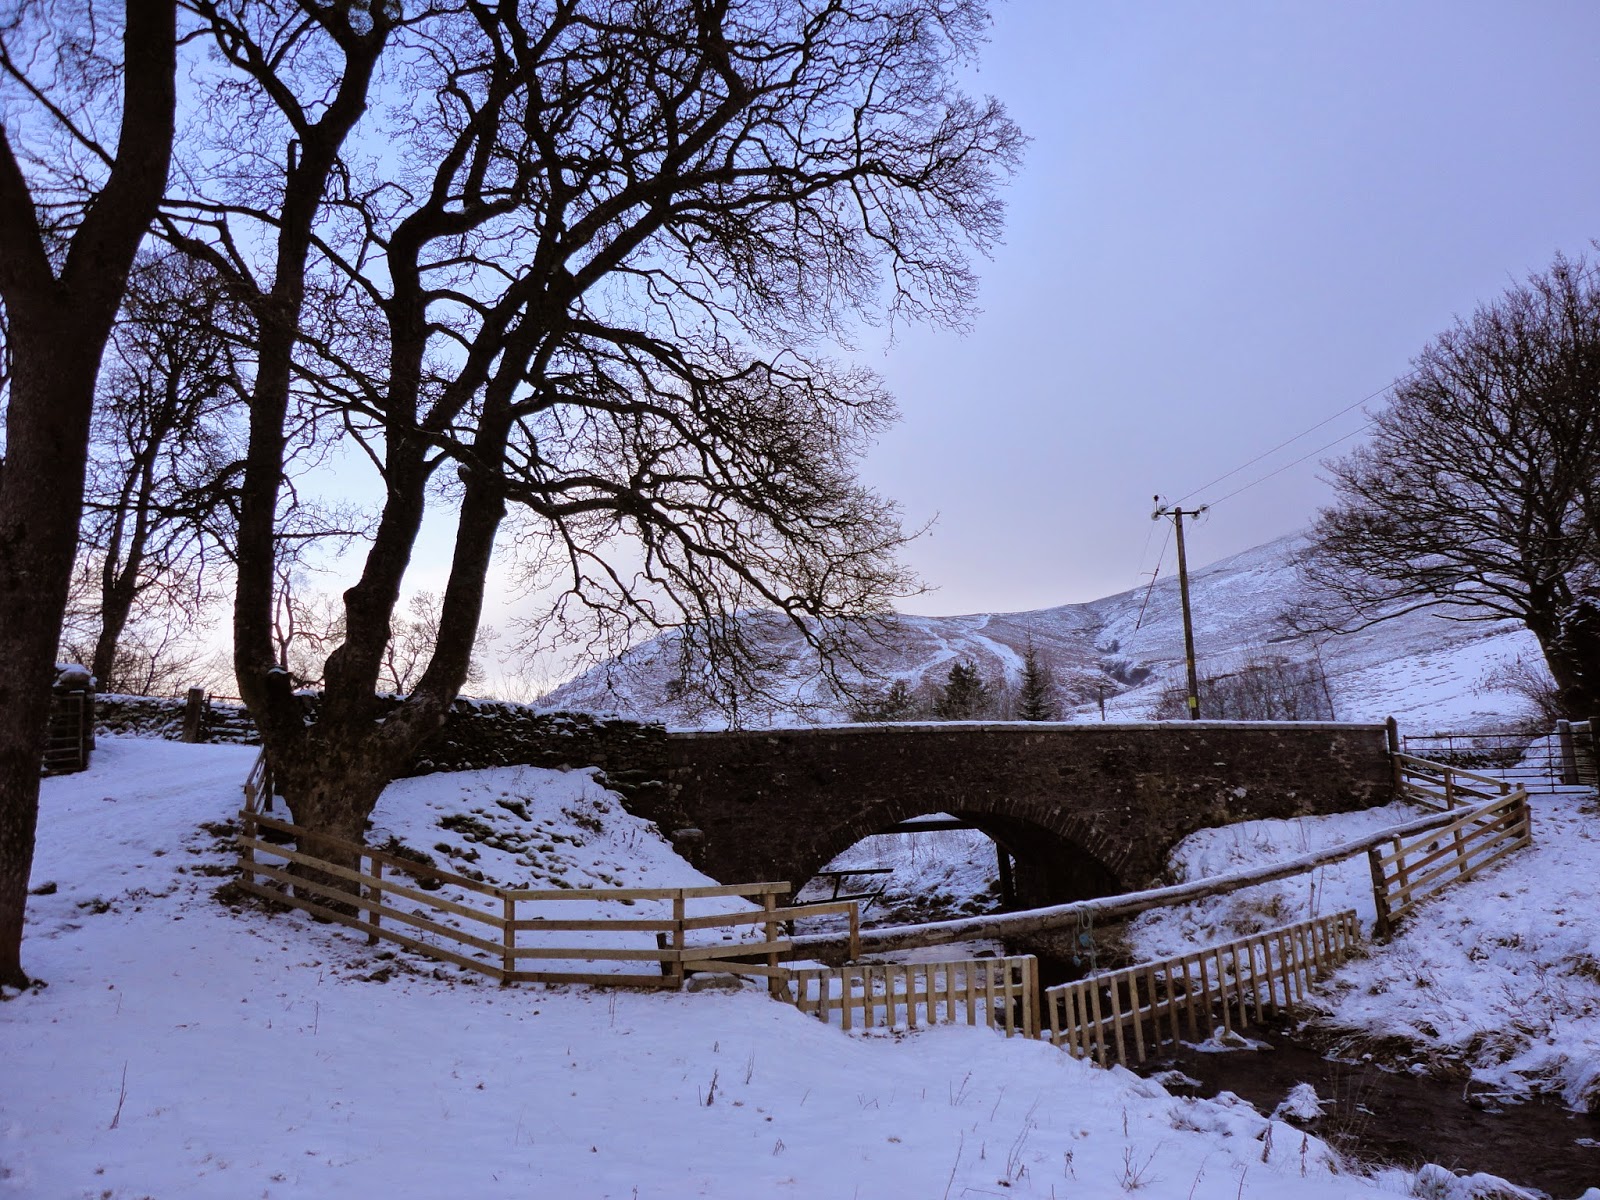 country farm landscape with trees, hills, river, bridge and snow in winter in scotland